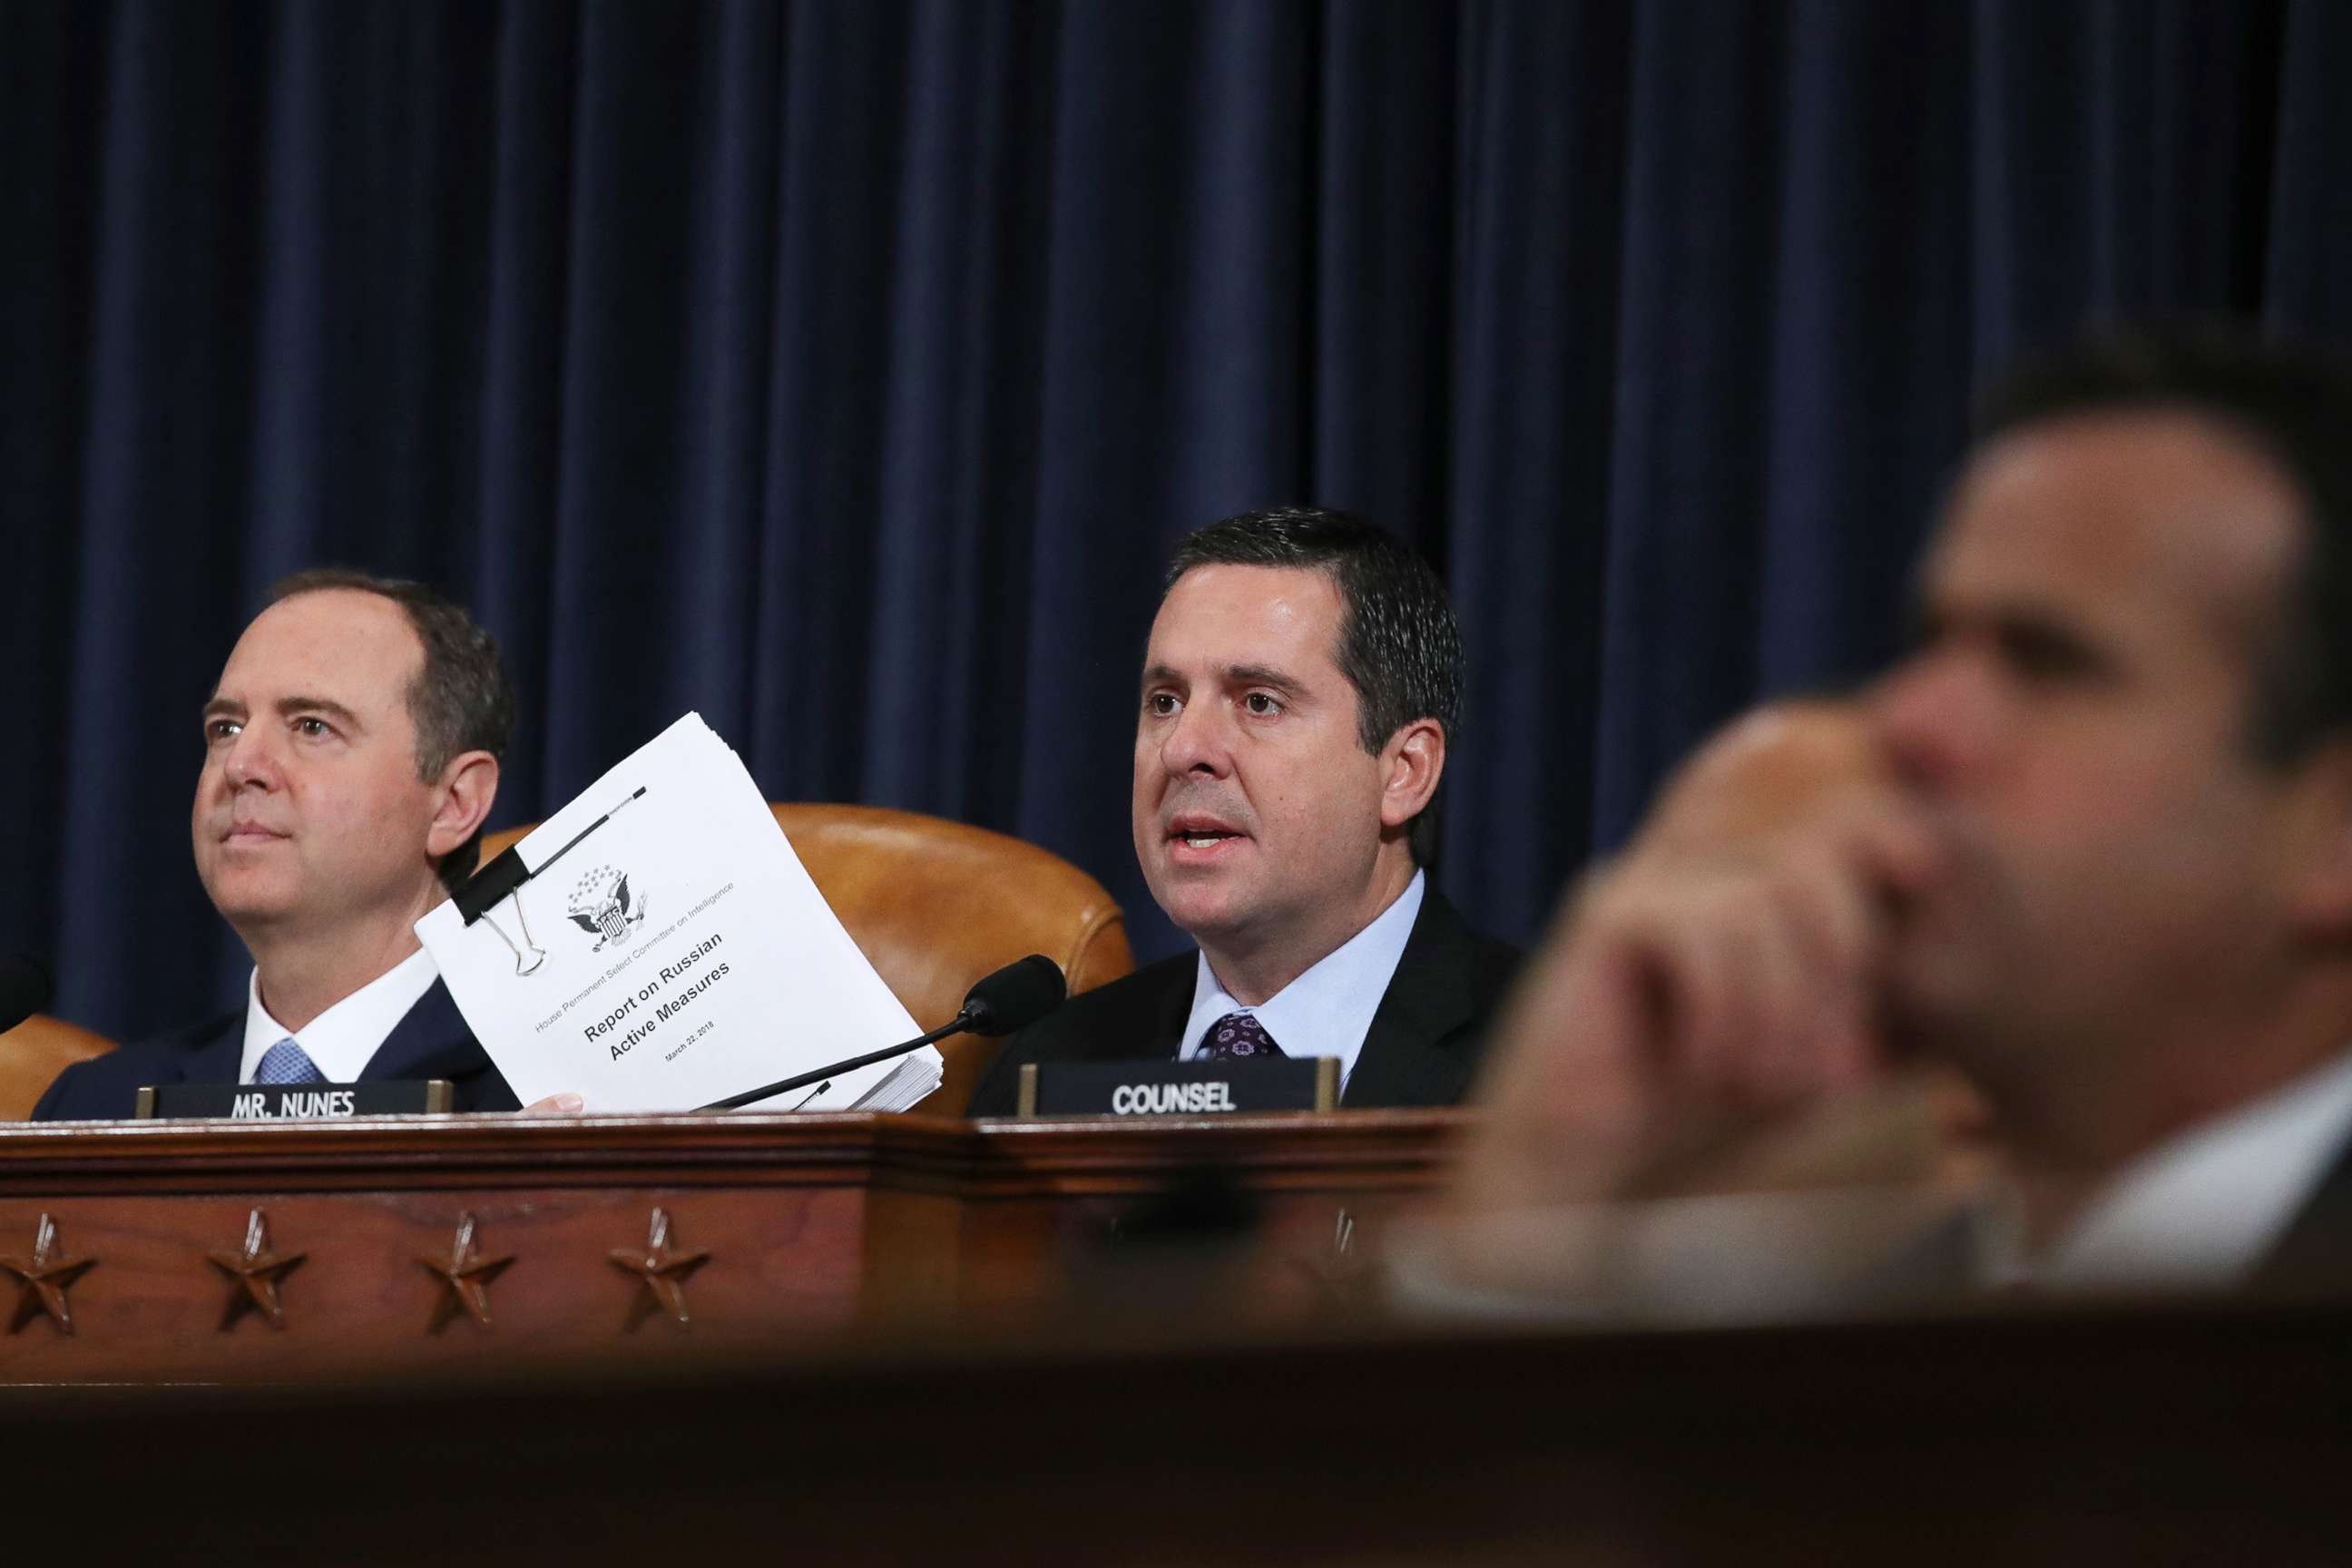 PHOTO: Ranking member Devin Nunes makes his opening statement as Rep. Adam Schiff listens before the House Intelligence Committee hearing on Capitol Hill, Nov. 21, 2019, in Washington.